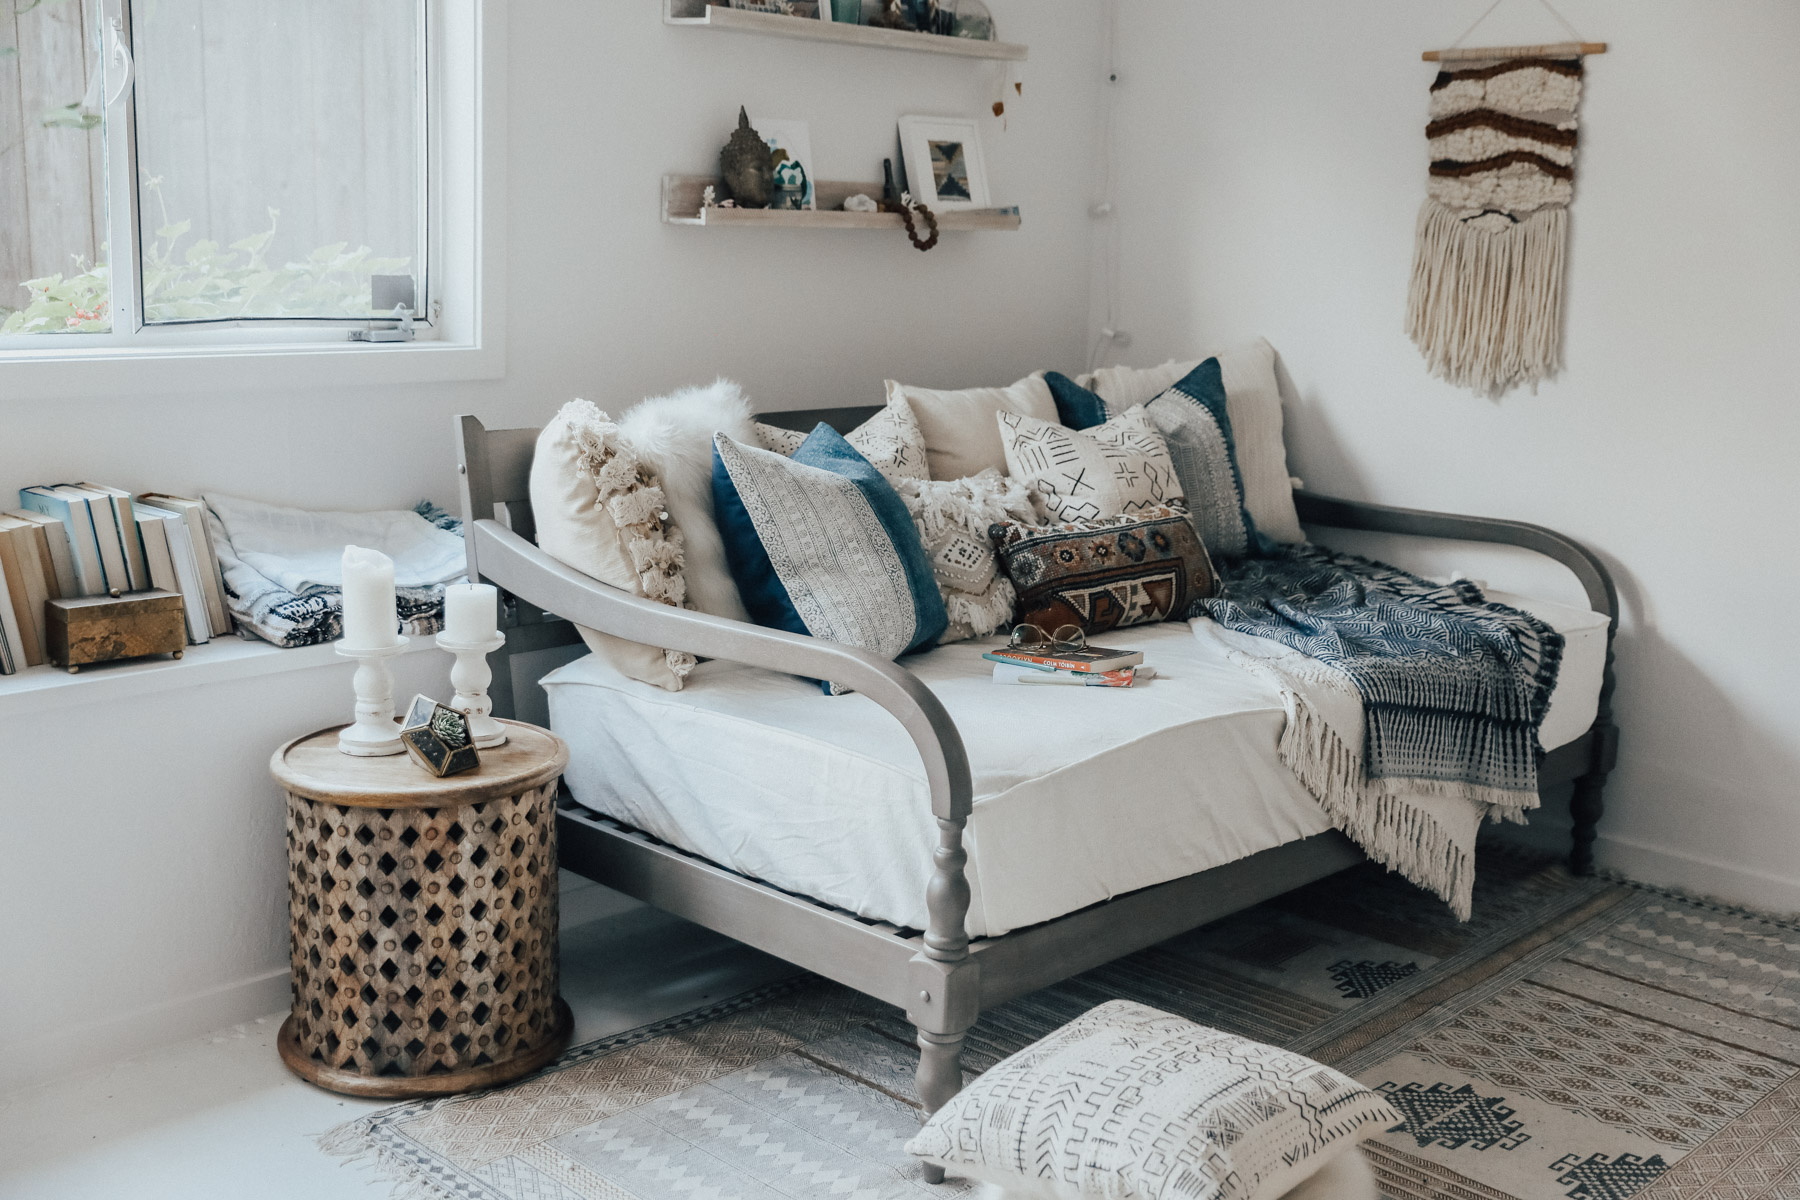 How to Decorate a Day Bed